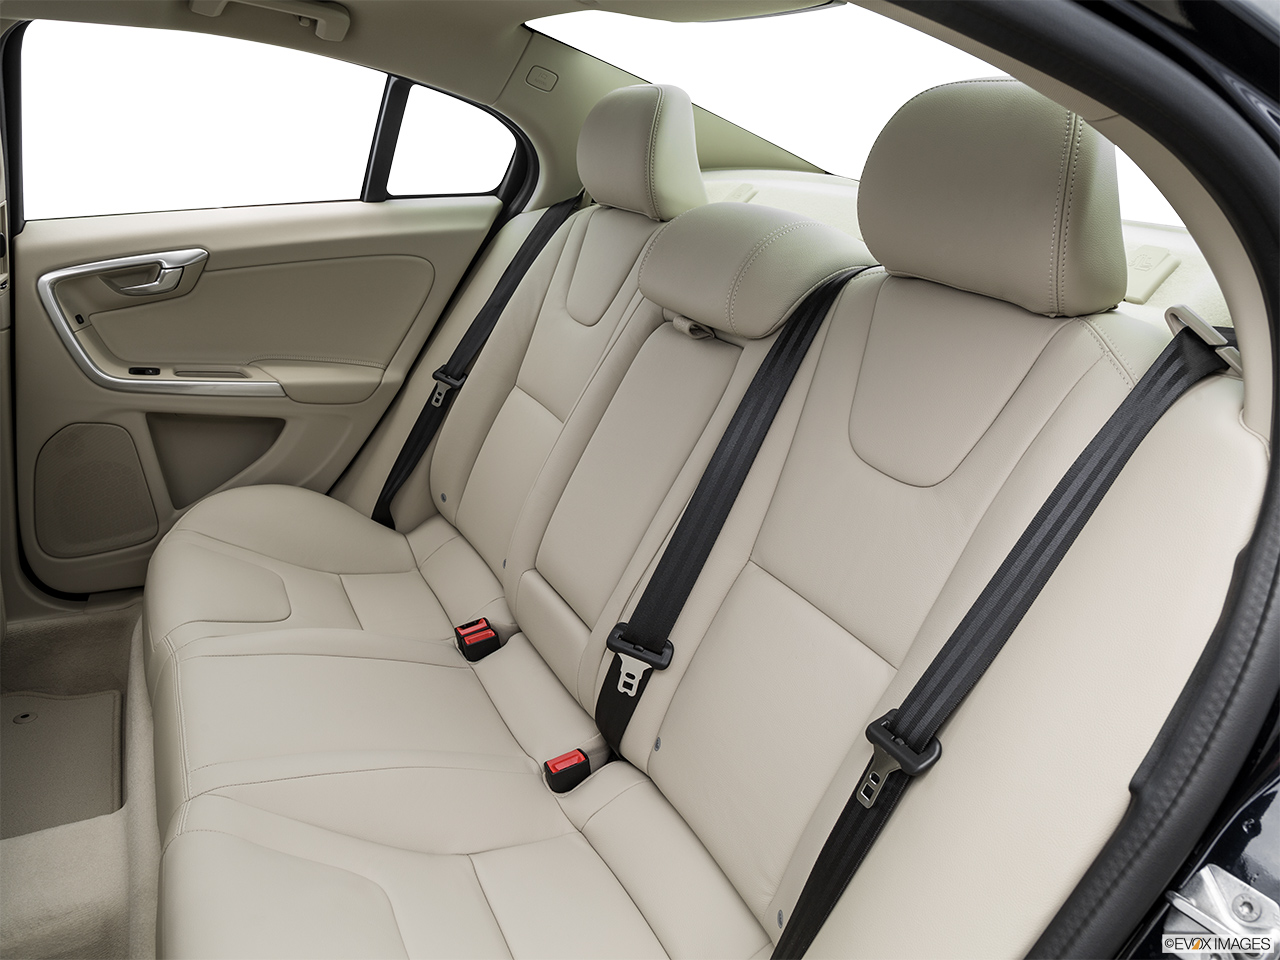 2016 Volvo S60 T5 Drive-E FWD Premier Rear seats from Drivers Side. 